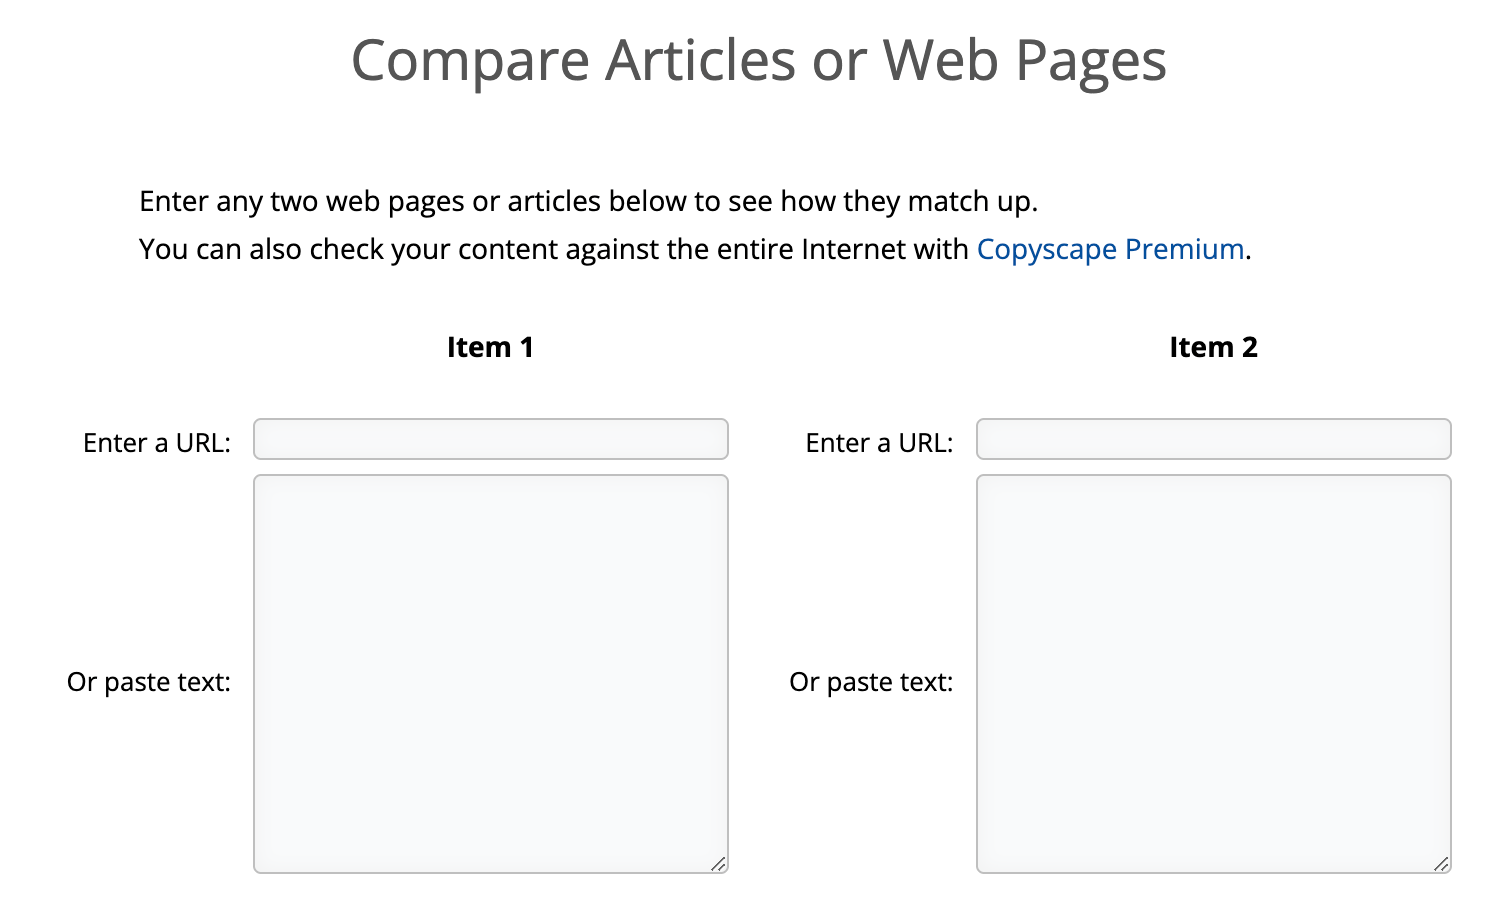 Copyscape's feature lets you compare two articles or webpages and see how they match up